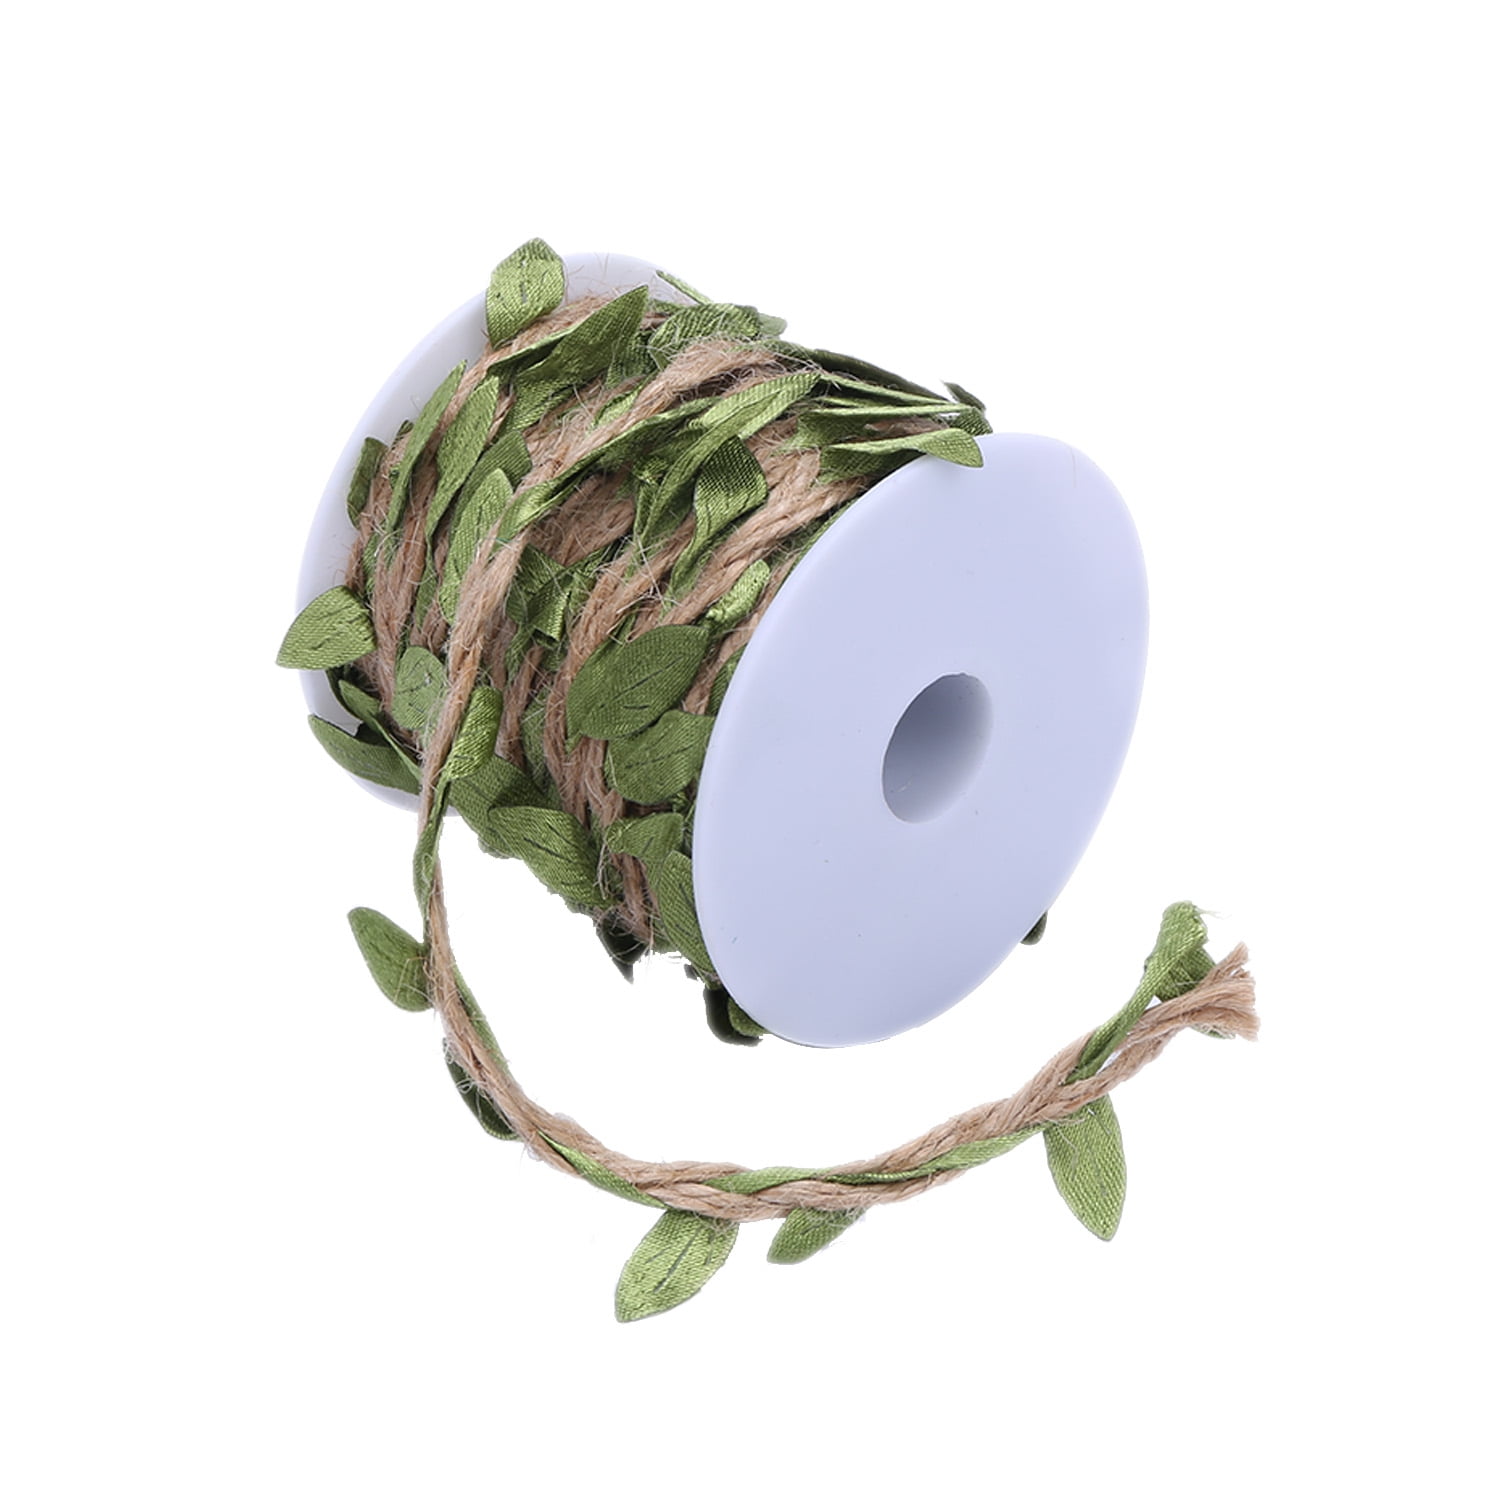 Details about   1 roll Simulation Green Leaves Rope Wedding Party Decor Gift Packaging Ropes 